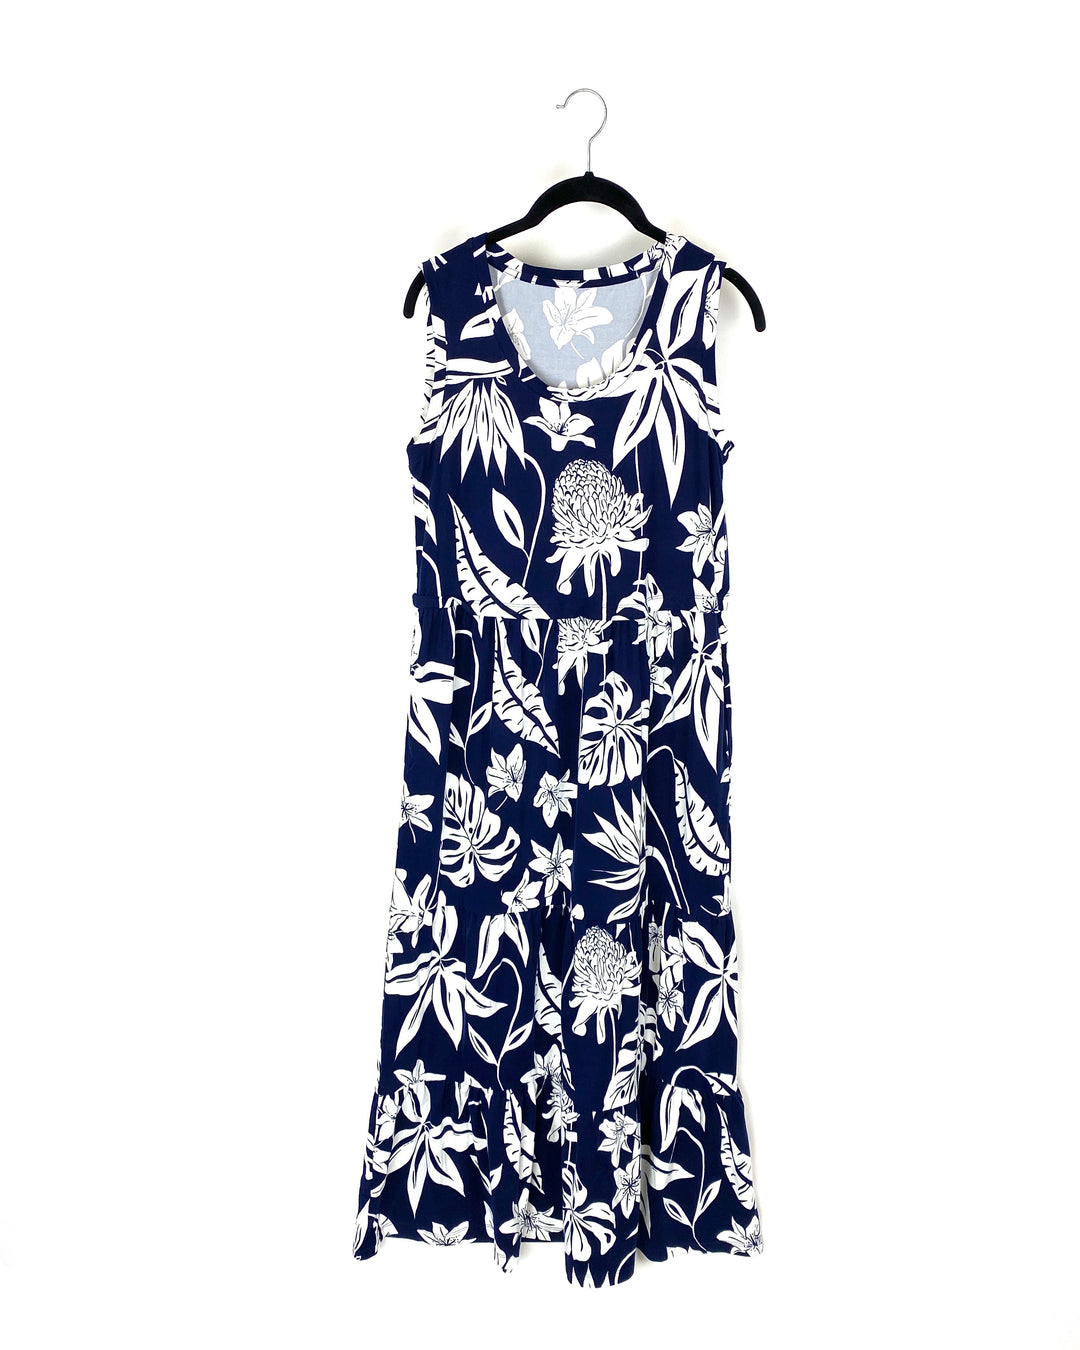 Navy Blue And White Floral Print Dress - Small/Medium